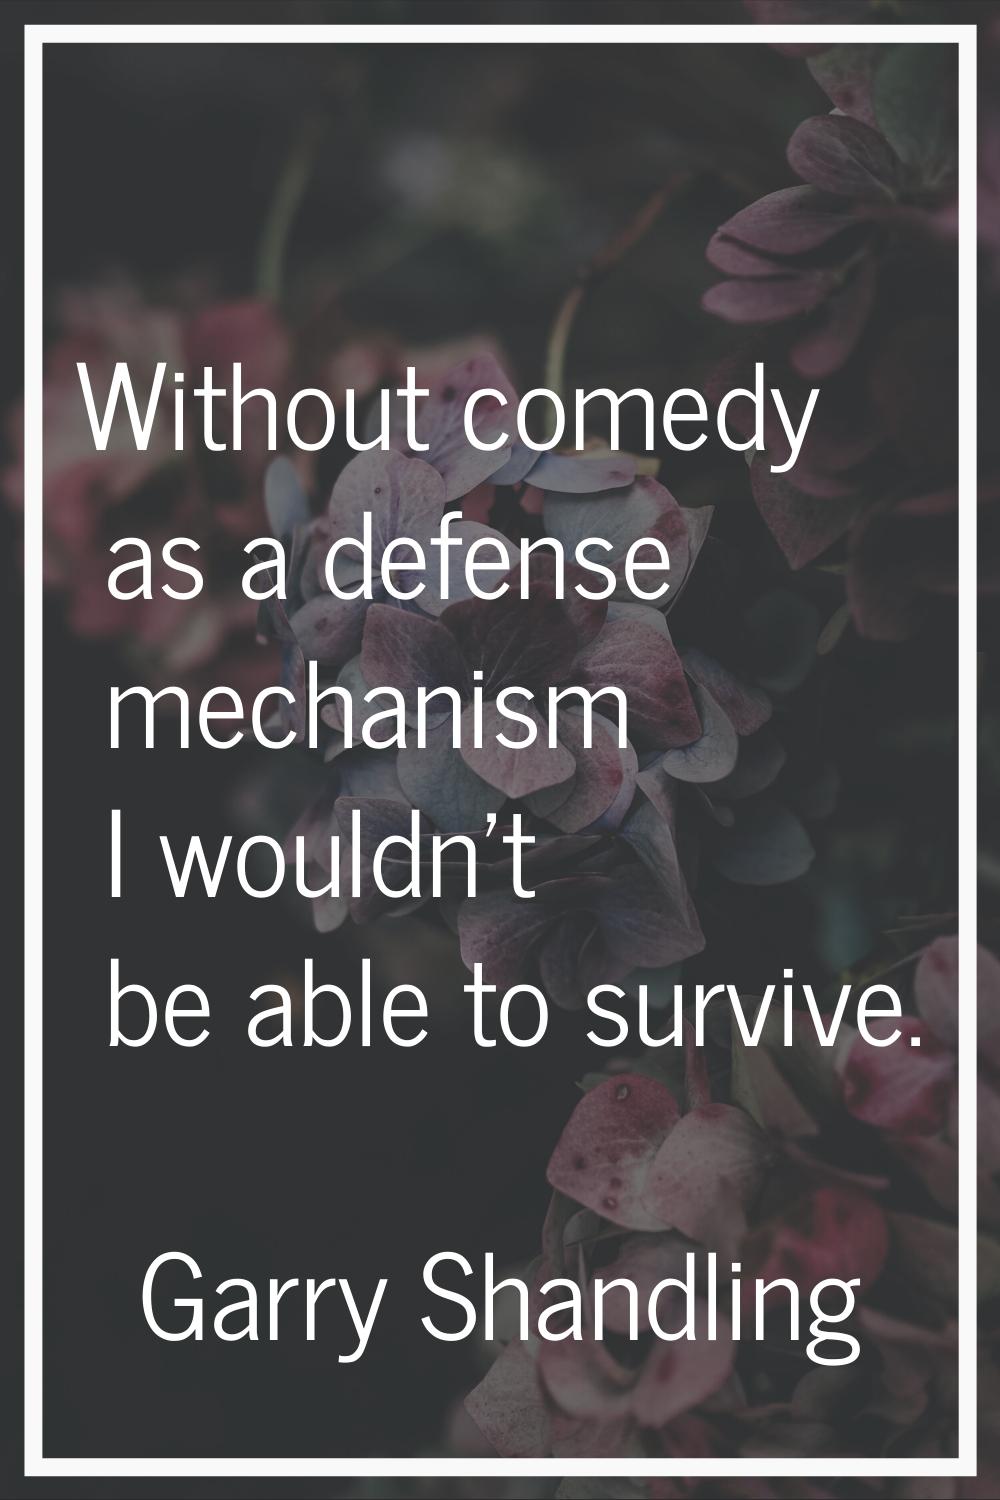 Without comedy as a defense mechanism I wouldn't be able to survive.